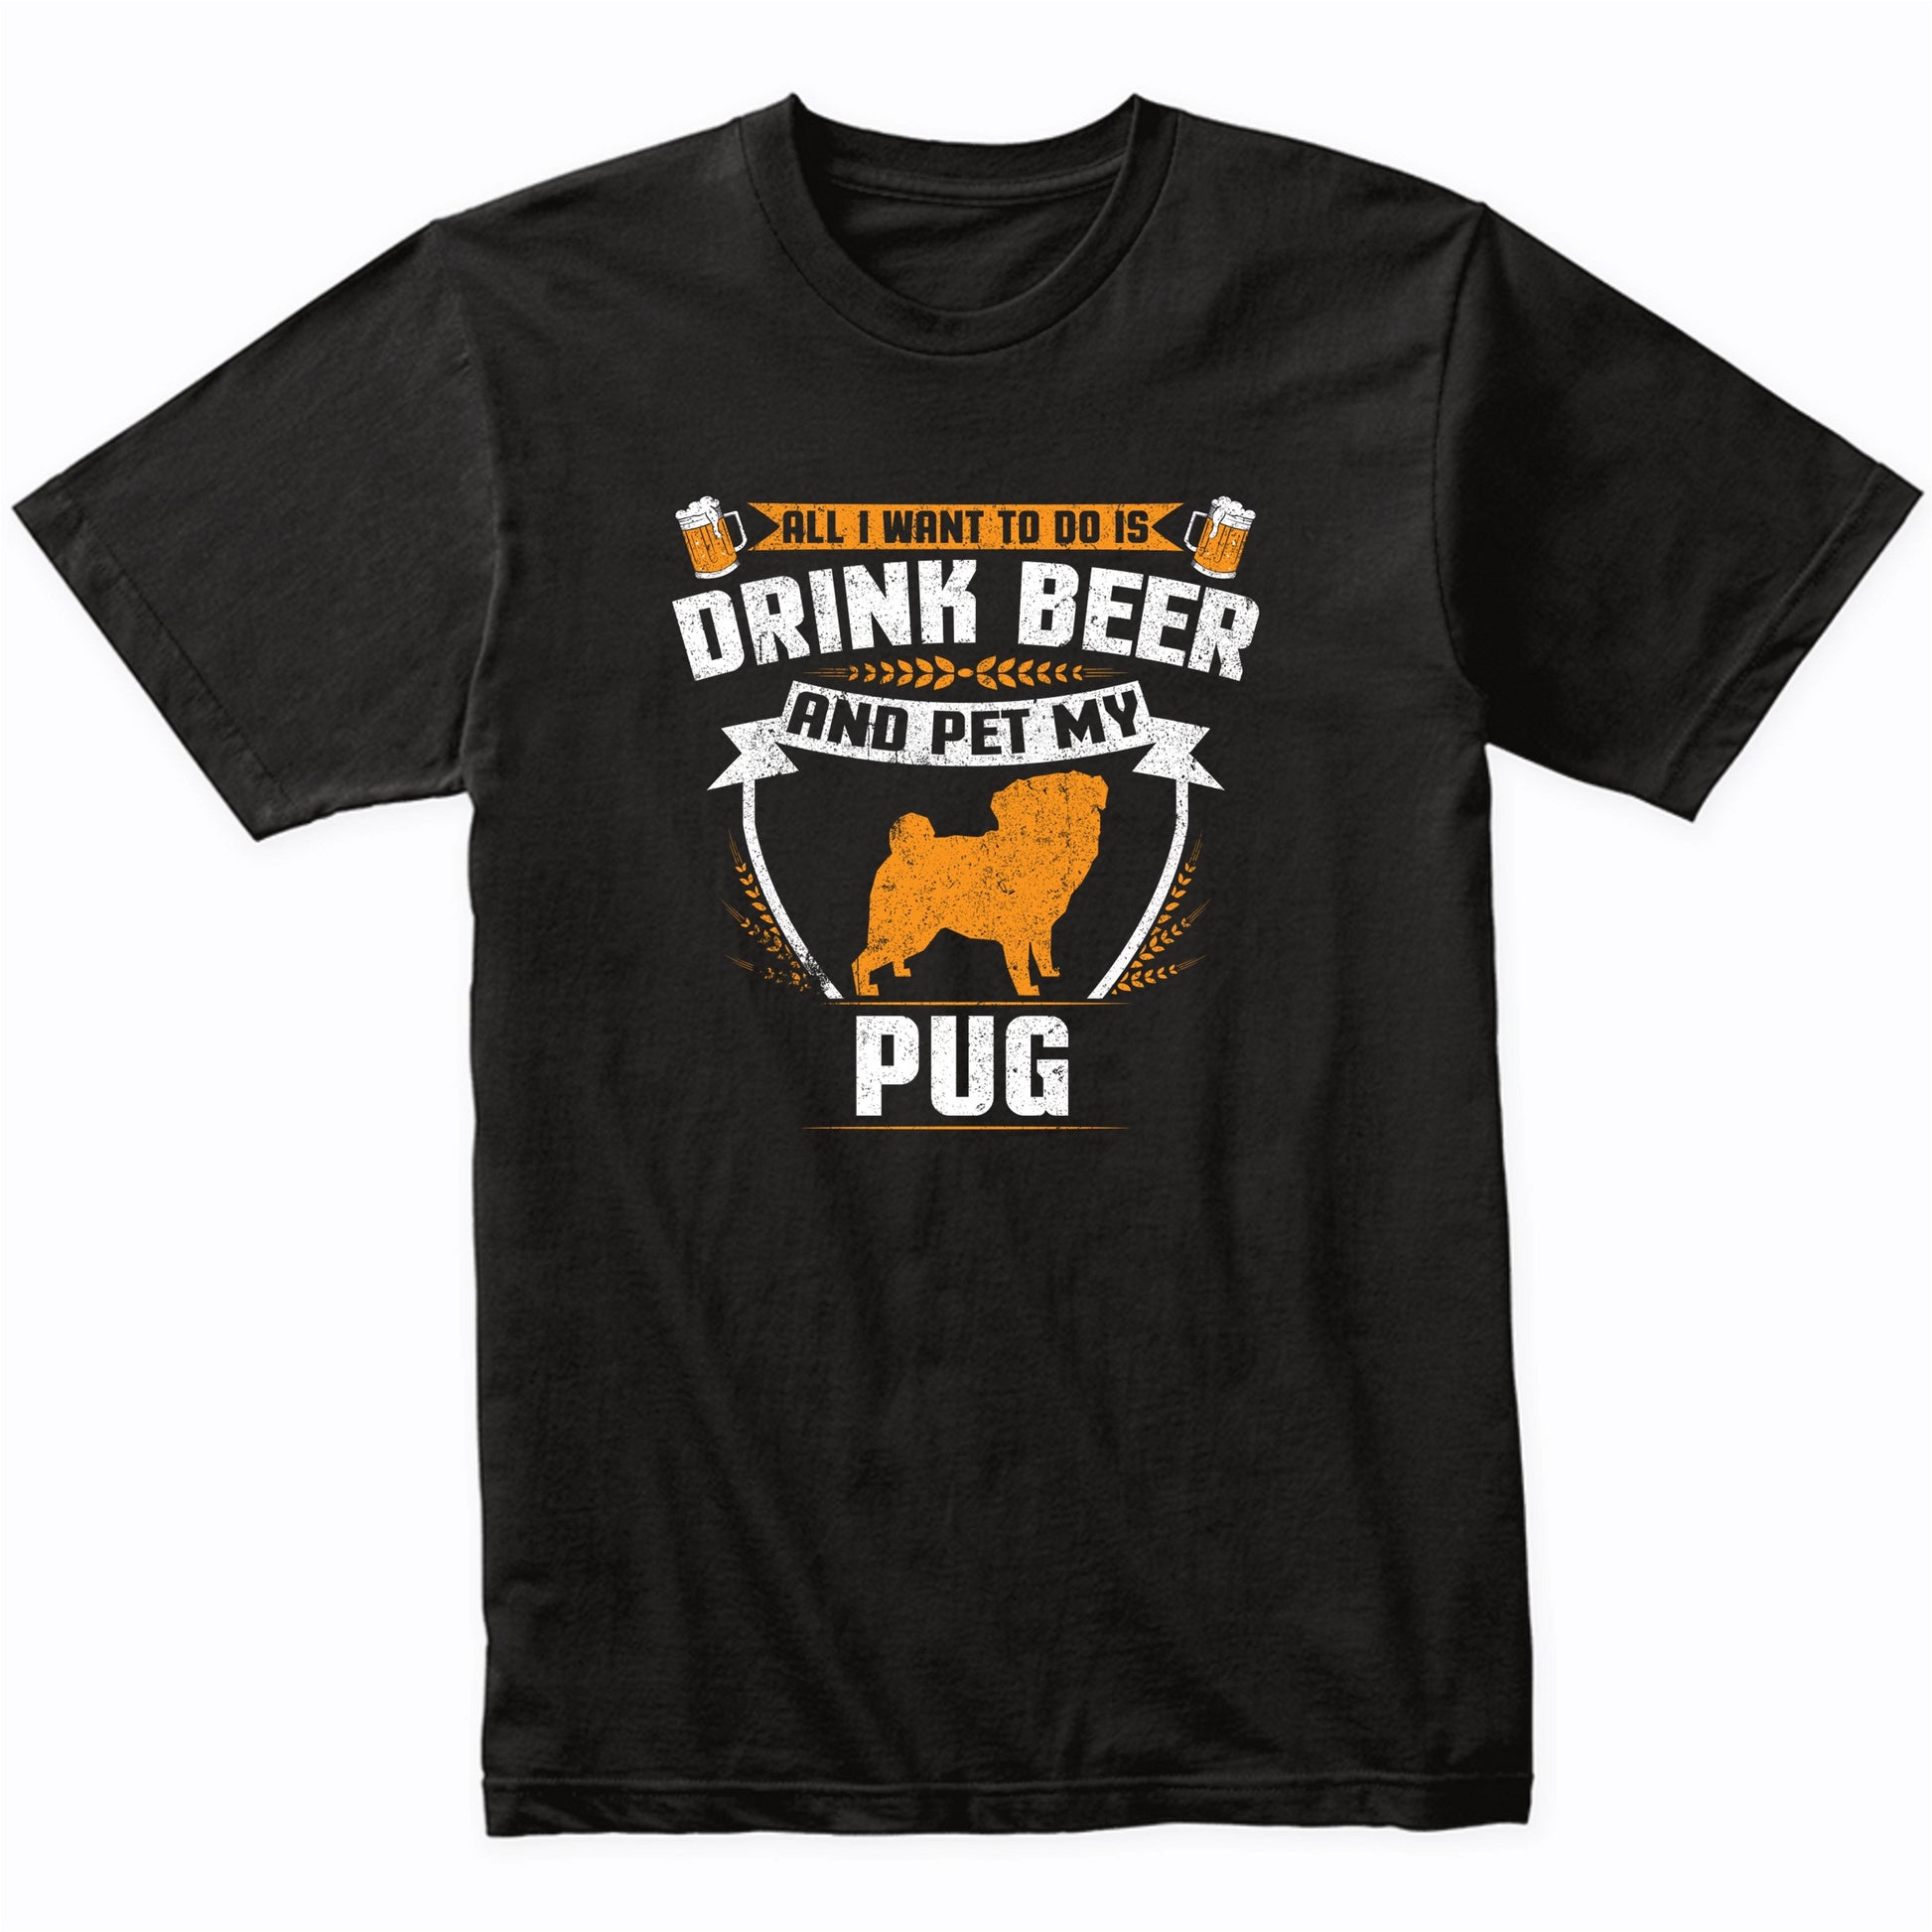 All I Want To Do Is Drink Beer And Pet My Pug Funny Dog Owner Shirt